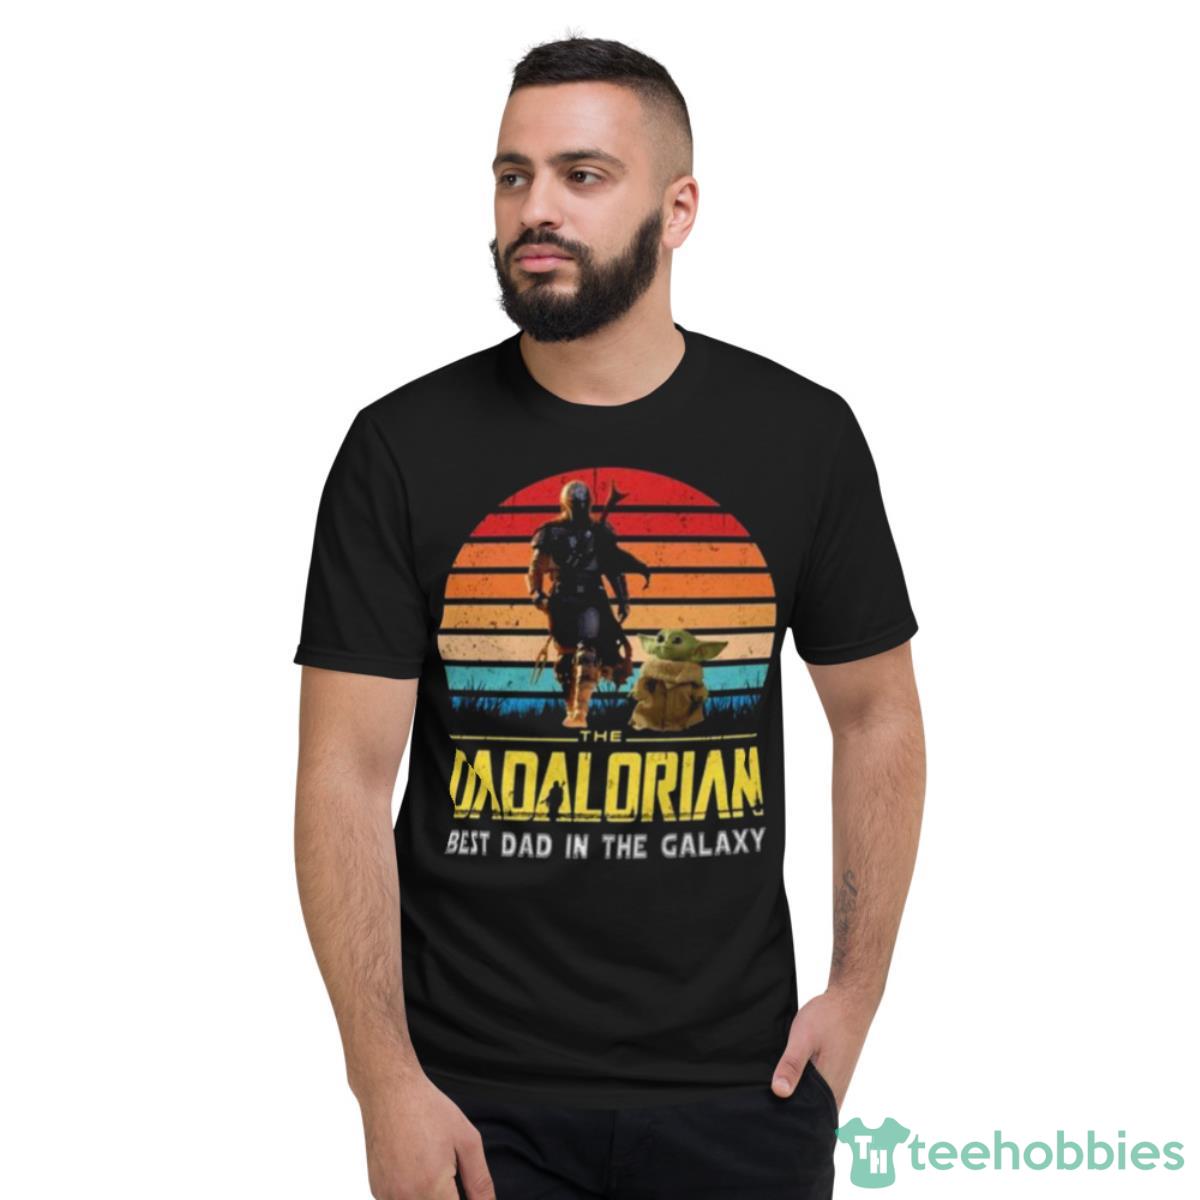 2023 The Dadalorian Best Dad In The Galaxy NBA Shirt Product Photo 2